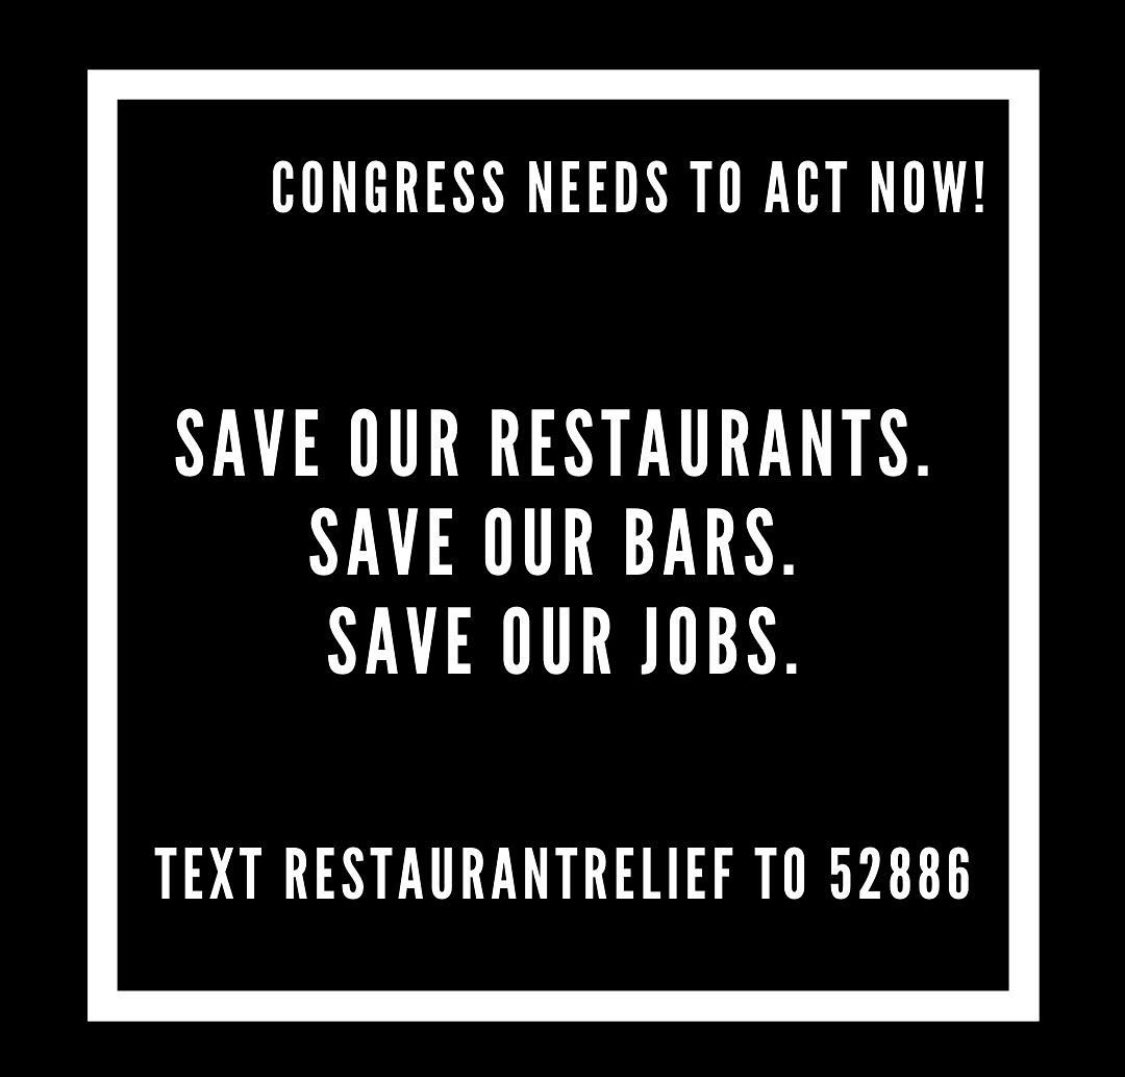 The hospitality industry and local businesses are in trouble. Tell congress we need relief now! #SaveOurRestaurants #SaveOurBars #SaveOurJobs